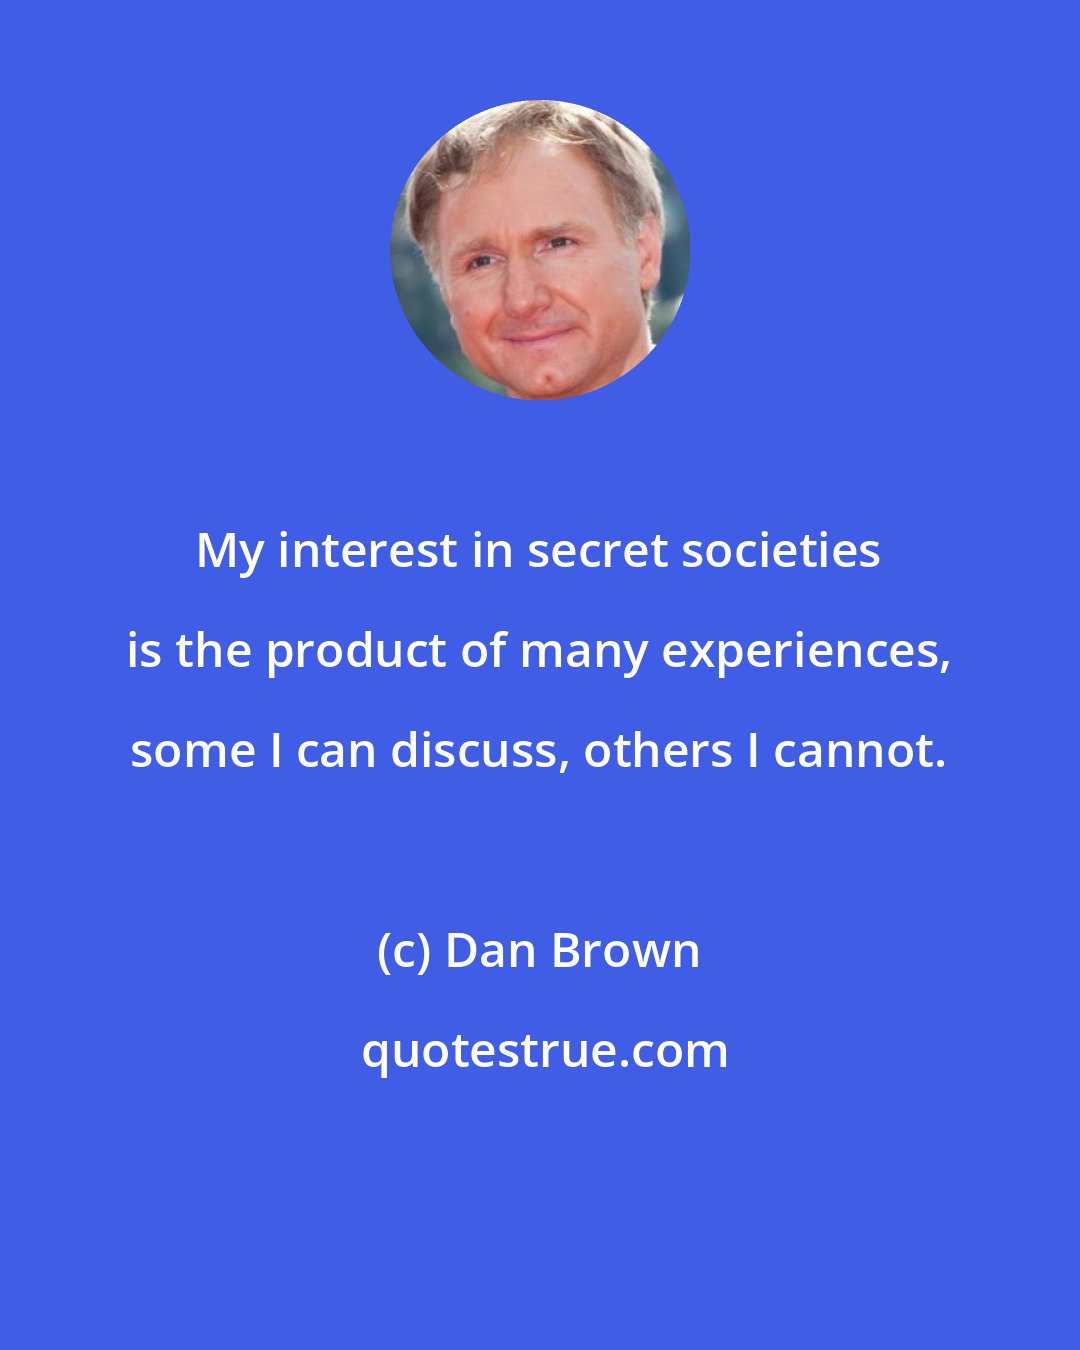 Dan Brown: My interest in secret societies is the product of many experiences, some I can discuss, others I cannot.